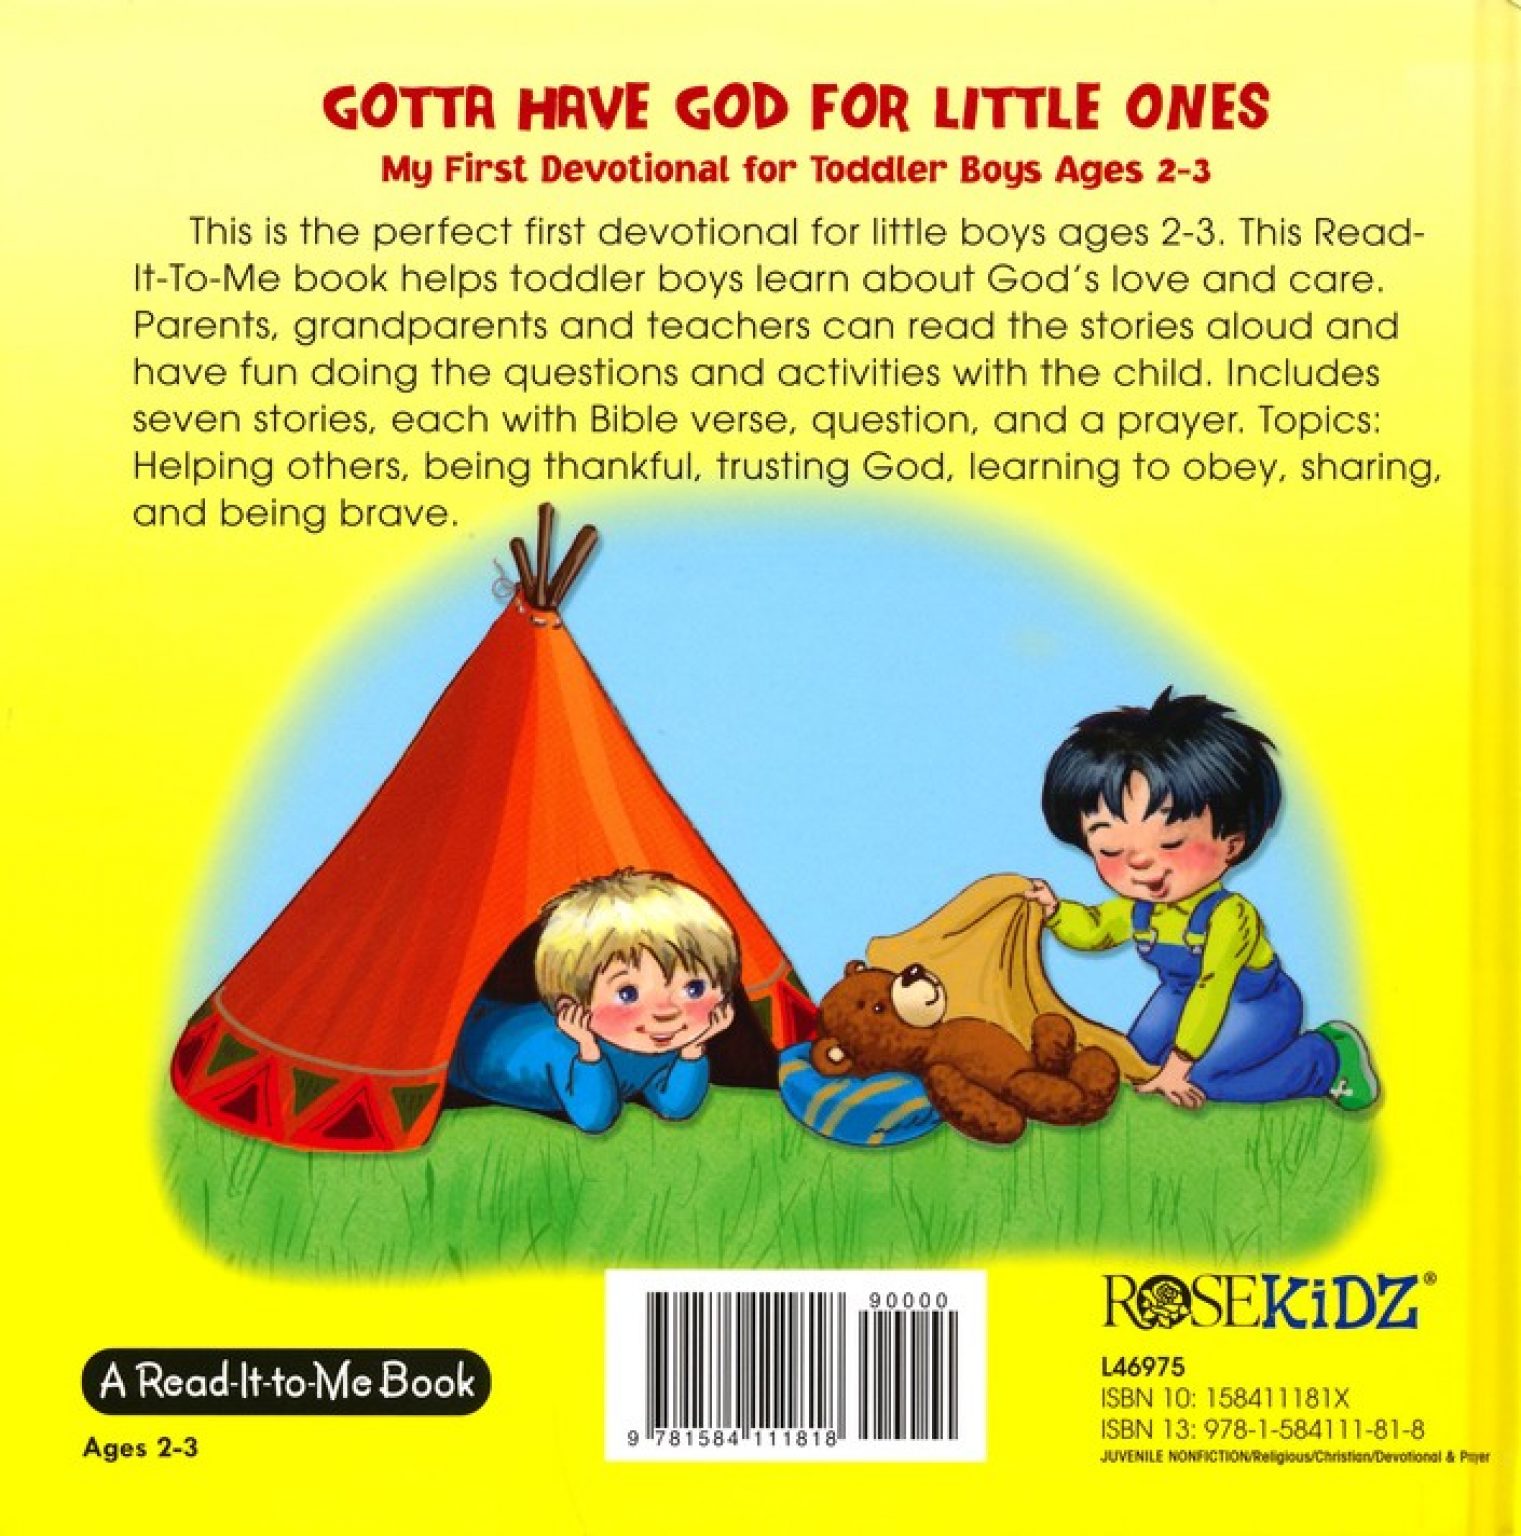 gotta have god for little ones toddler devotional for boys 2 3 years old 7